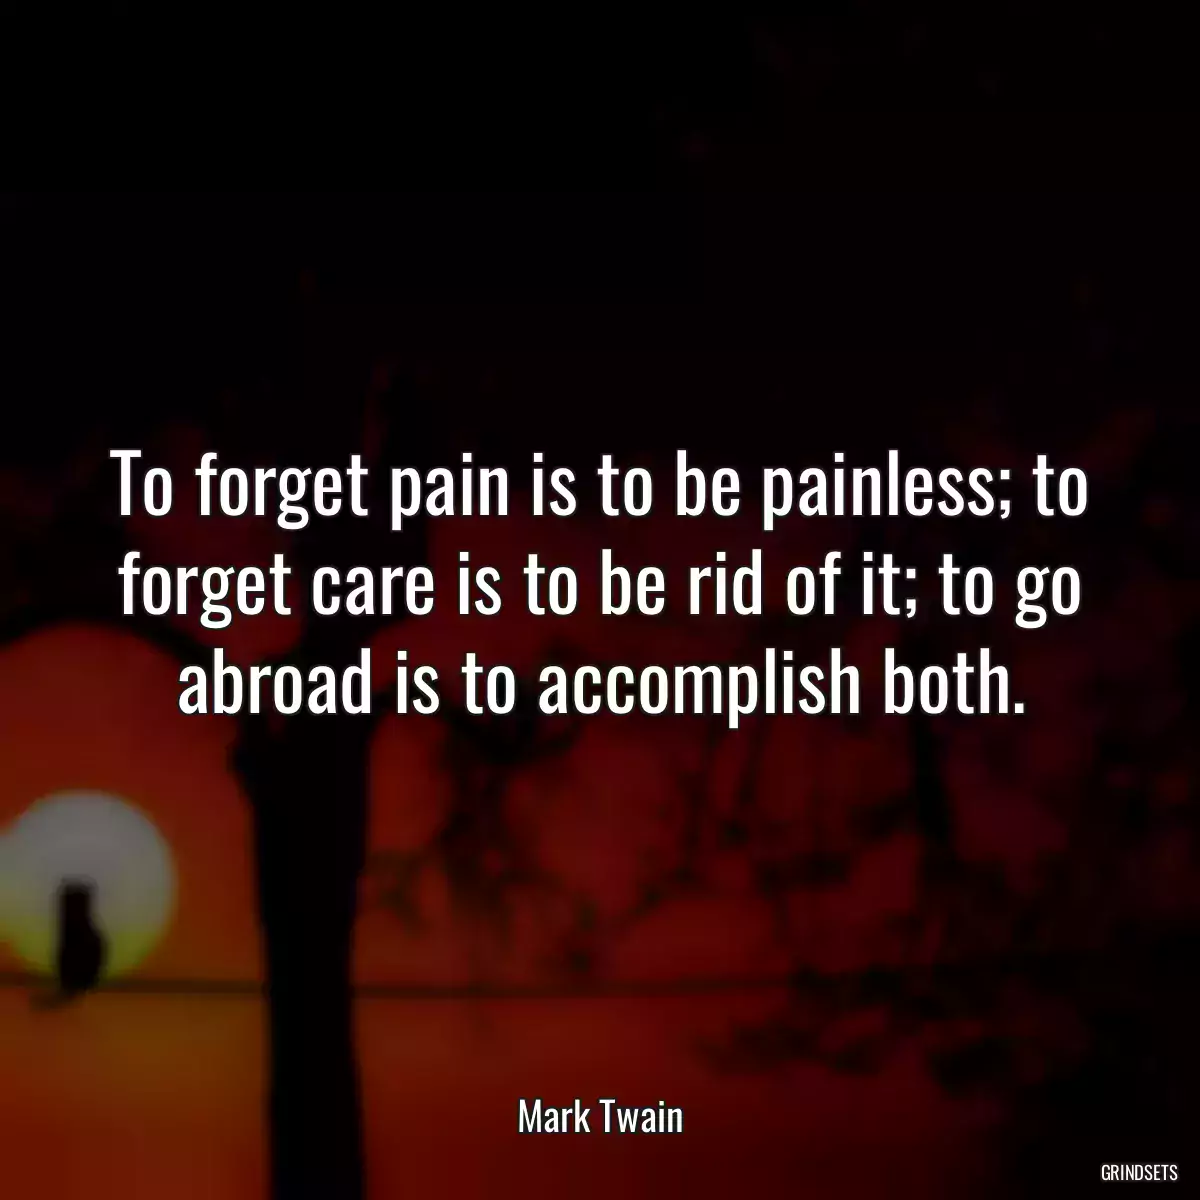 To forget pain is to be painless; to forget care is to be rid of it; to go abroad is to accomplish both.